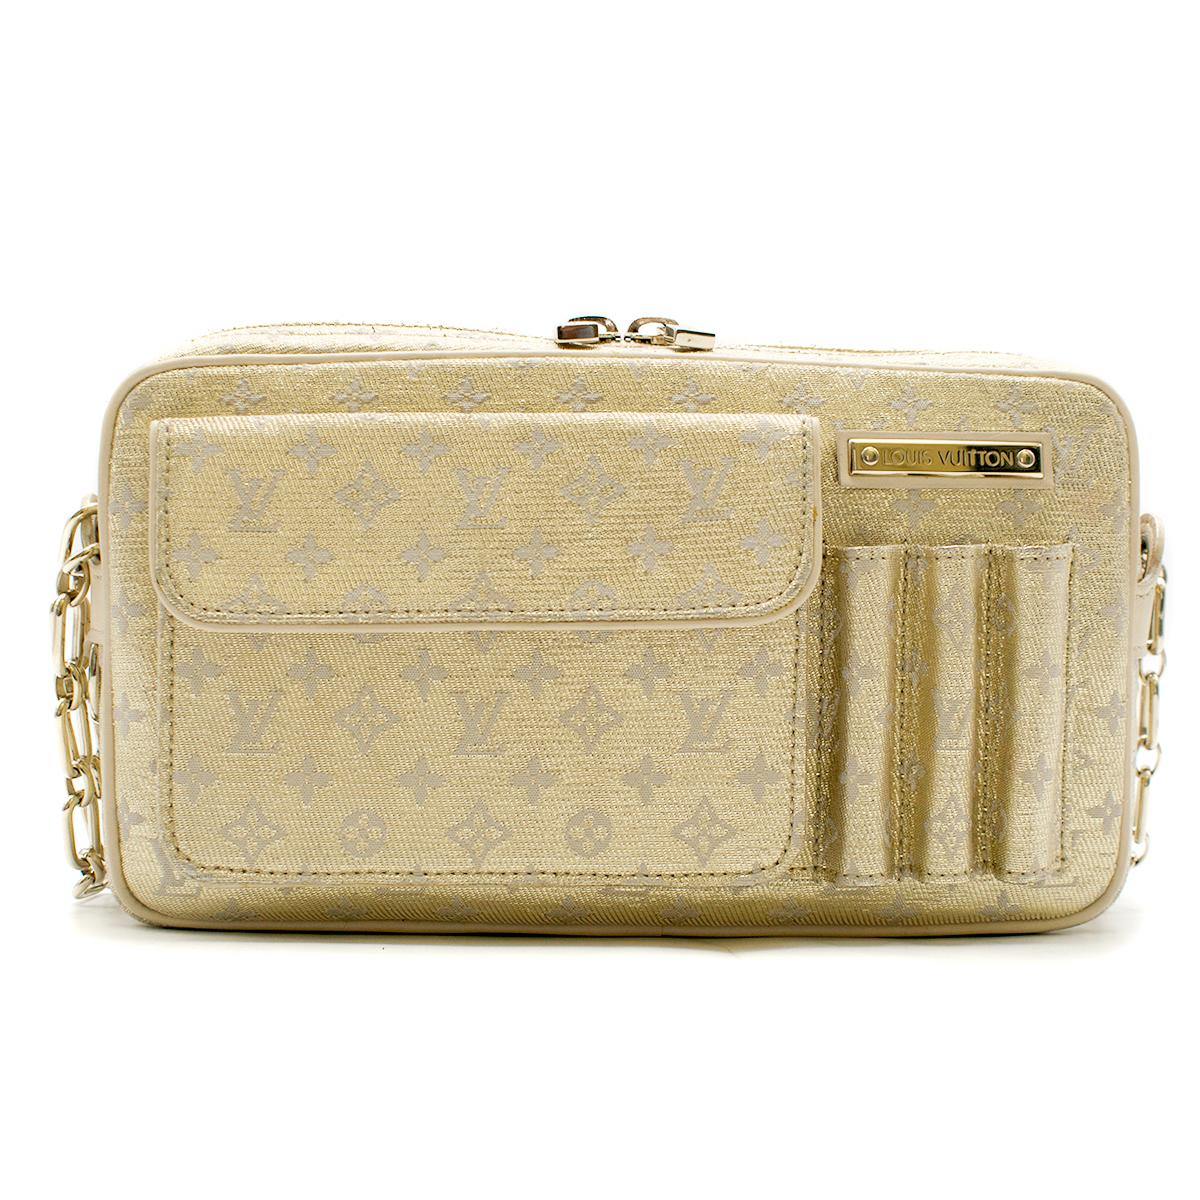 Louis Vuitton Small Gold Monogram Bag

- Gold, leather and canvas
- Gold metallic monogram 
  pattern 
- Shiny gold hardware
- Tan leather detail
- LV shiny gold plate 
- Outer snap shut small pouch 
- One inner pouch 
- Zipper shut closure
- Double